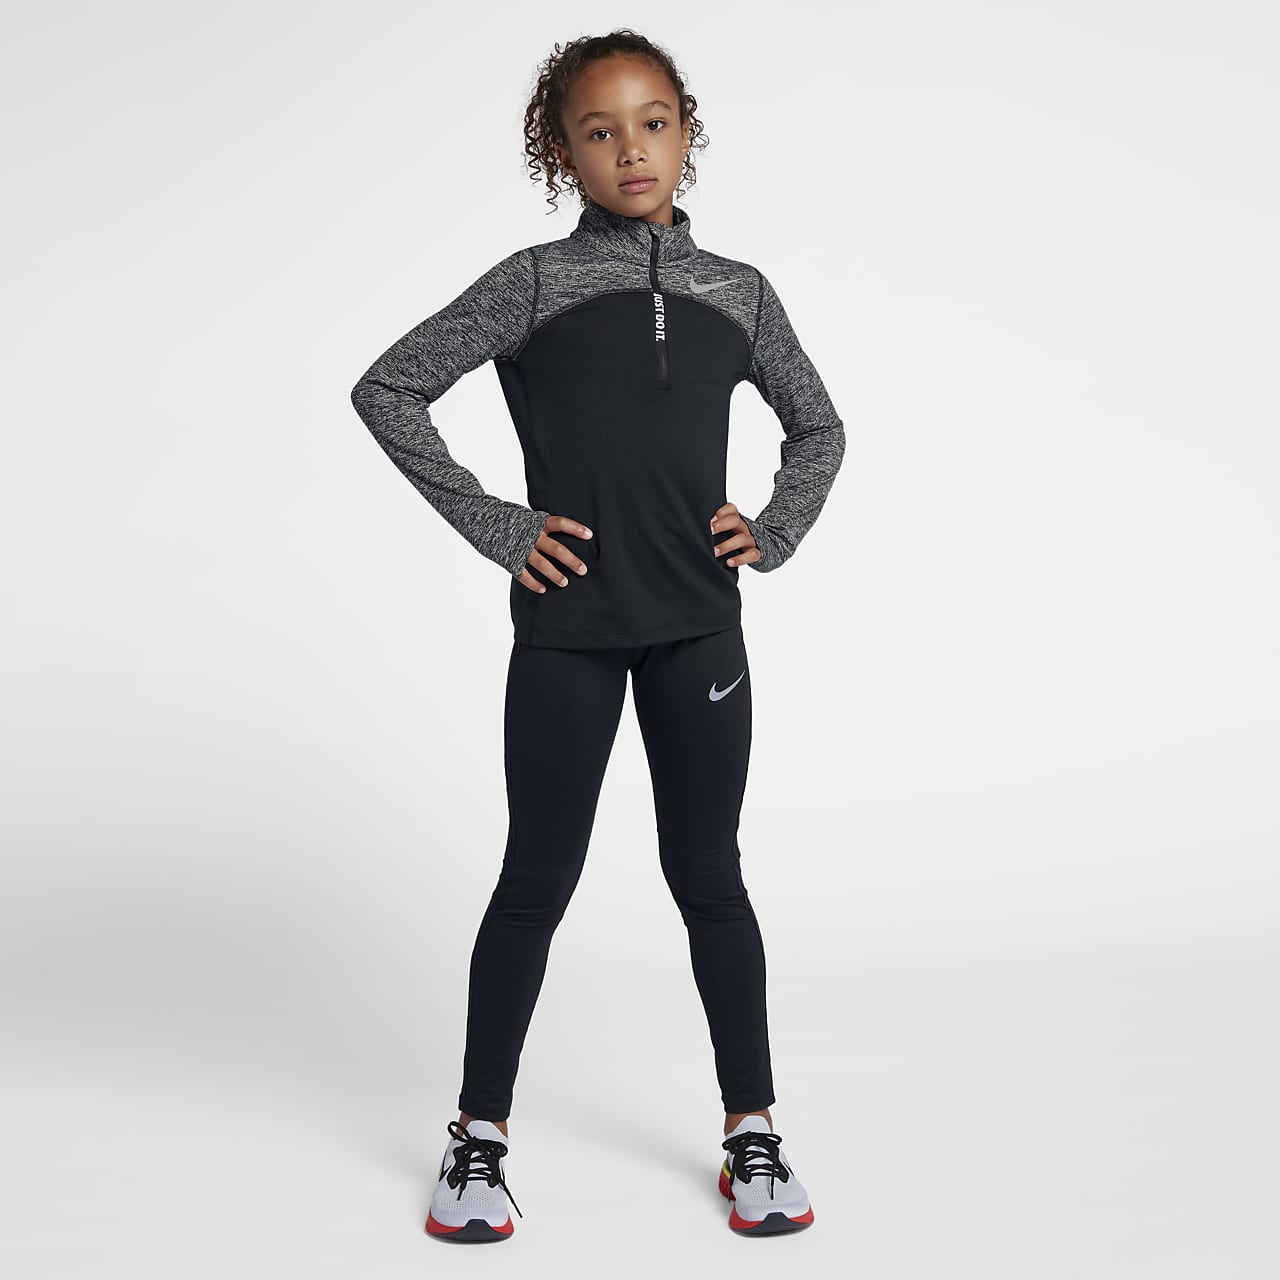 https://static.nike.com/a/images/t_PDP_1280_v1/f_auto,q_auto:eco/vzz6j7ecwrfhduy733gg/power-older-3-4-running-tights-FL5lFg.png